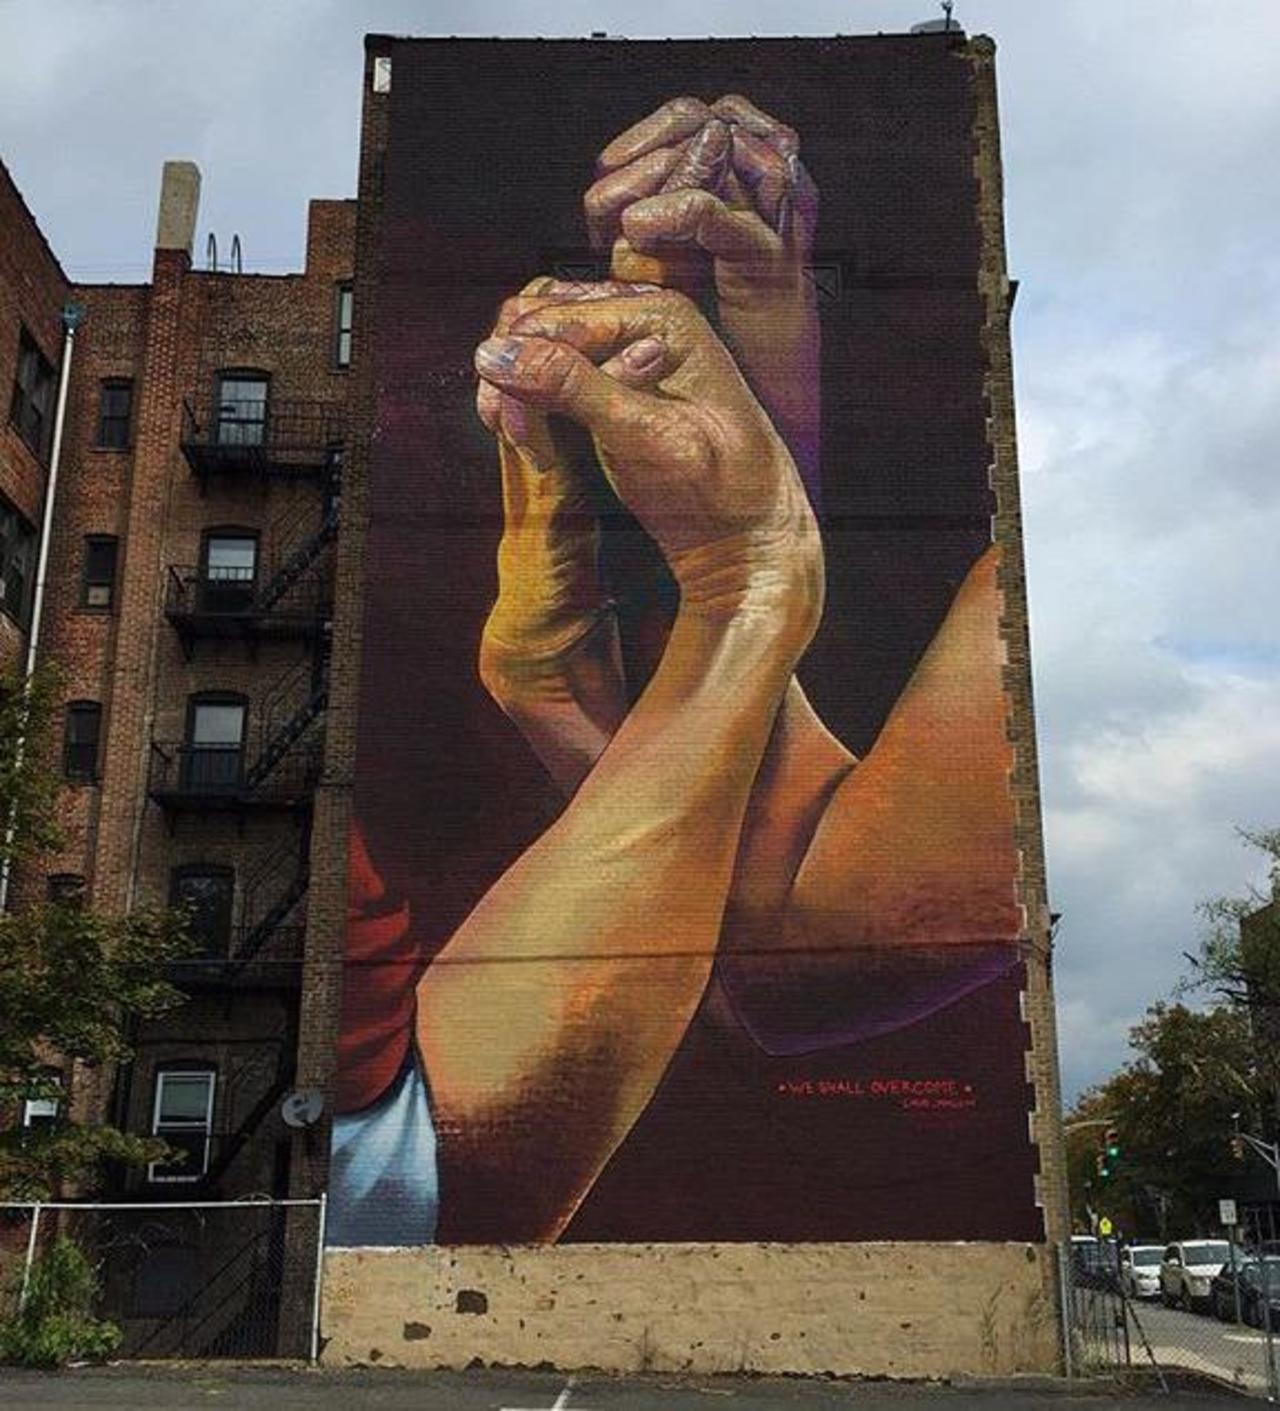 New Street Art by CaseMaclaim in Jersey City for the TheBKcollective 

#art #graffiti #mural #streetart http://t.co/9bY1xUjvrL googlestre…